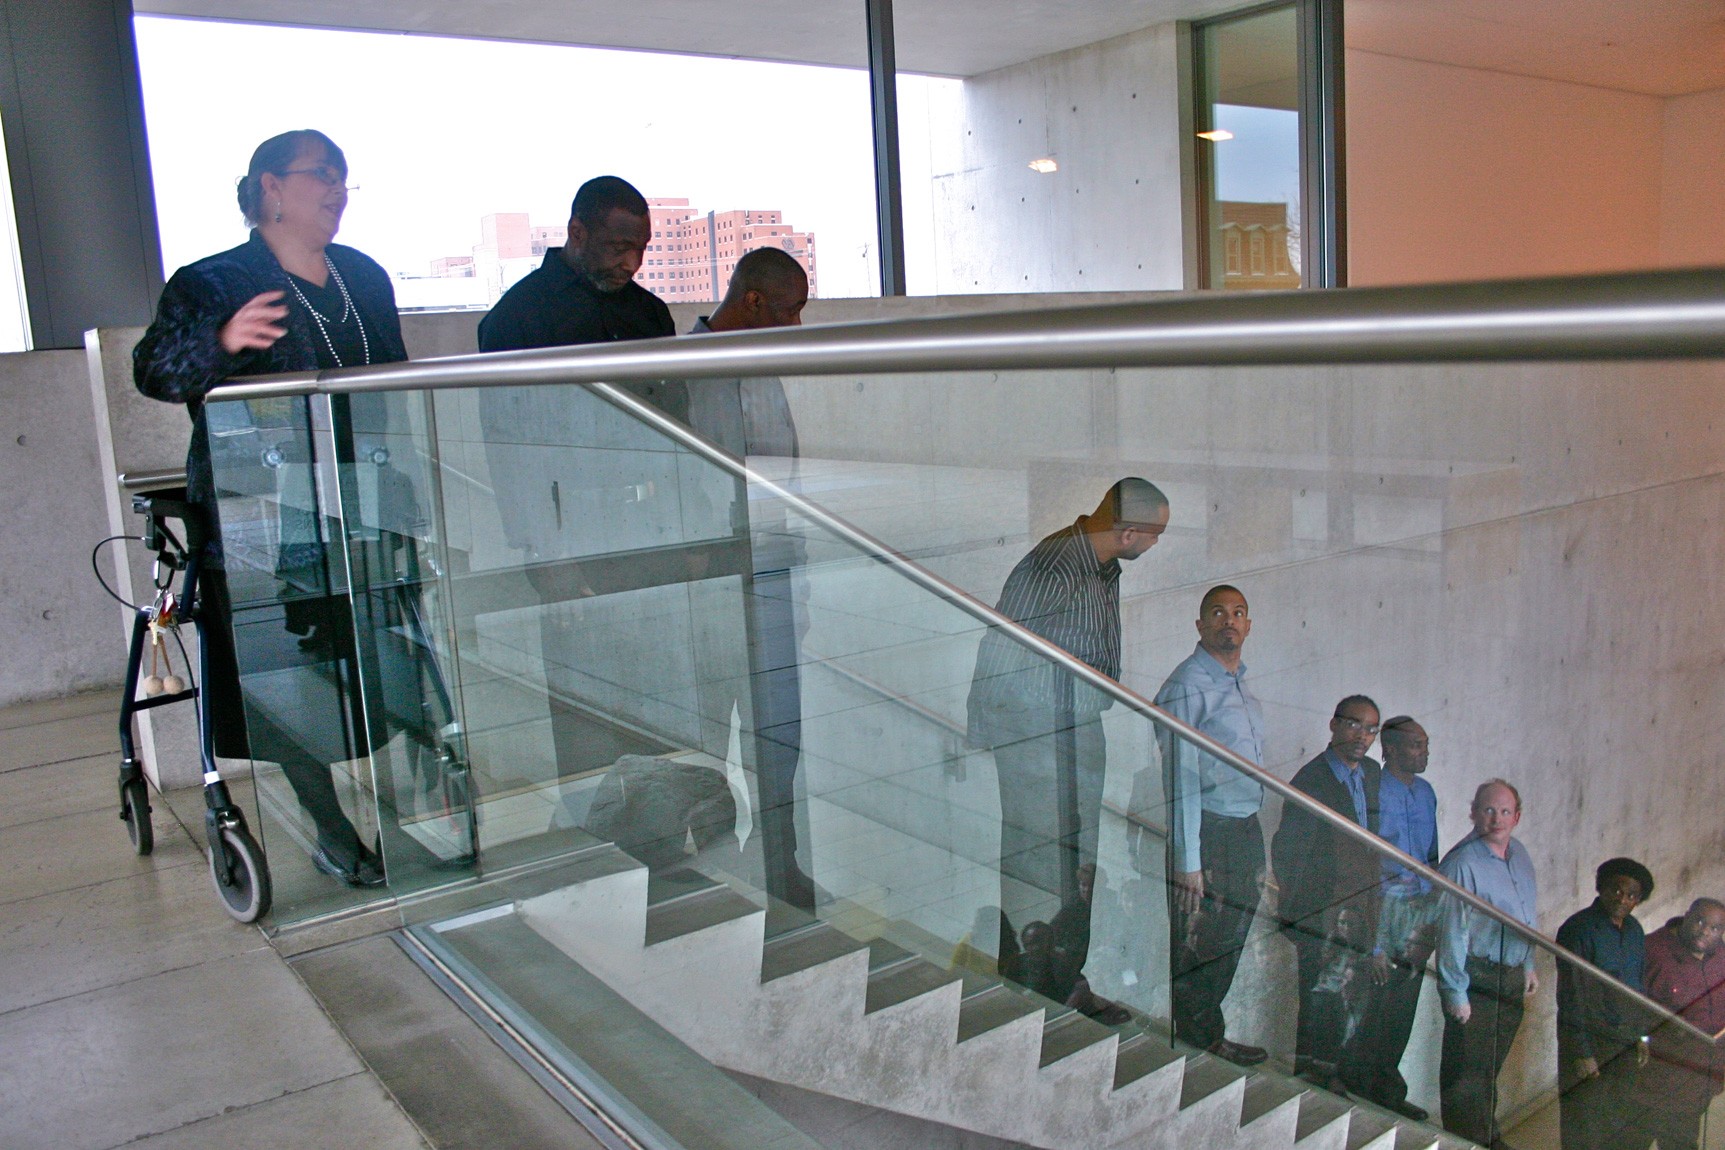 Performers line the Mezzanine staircase.